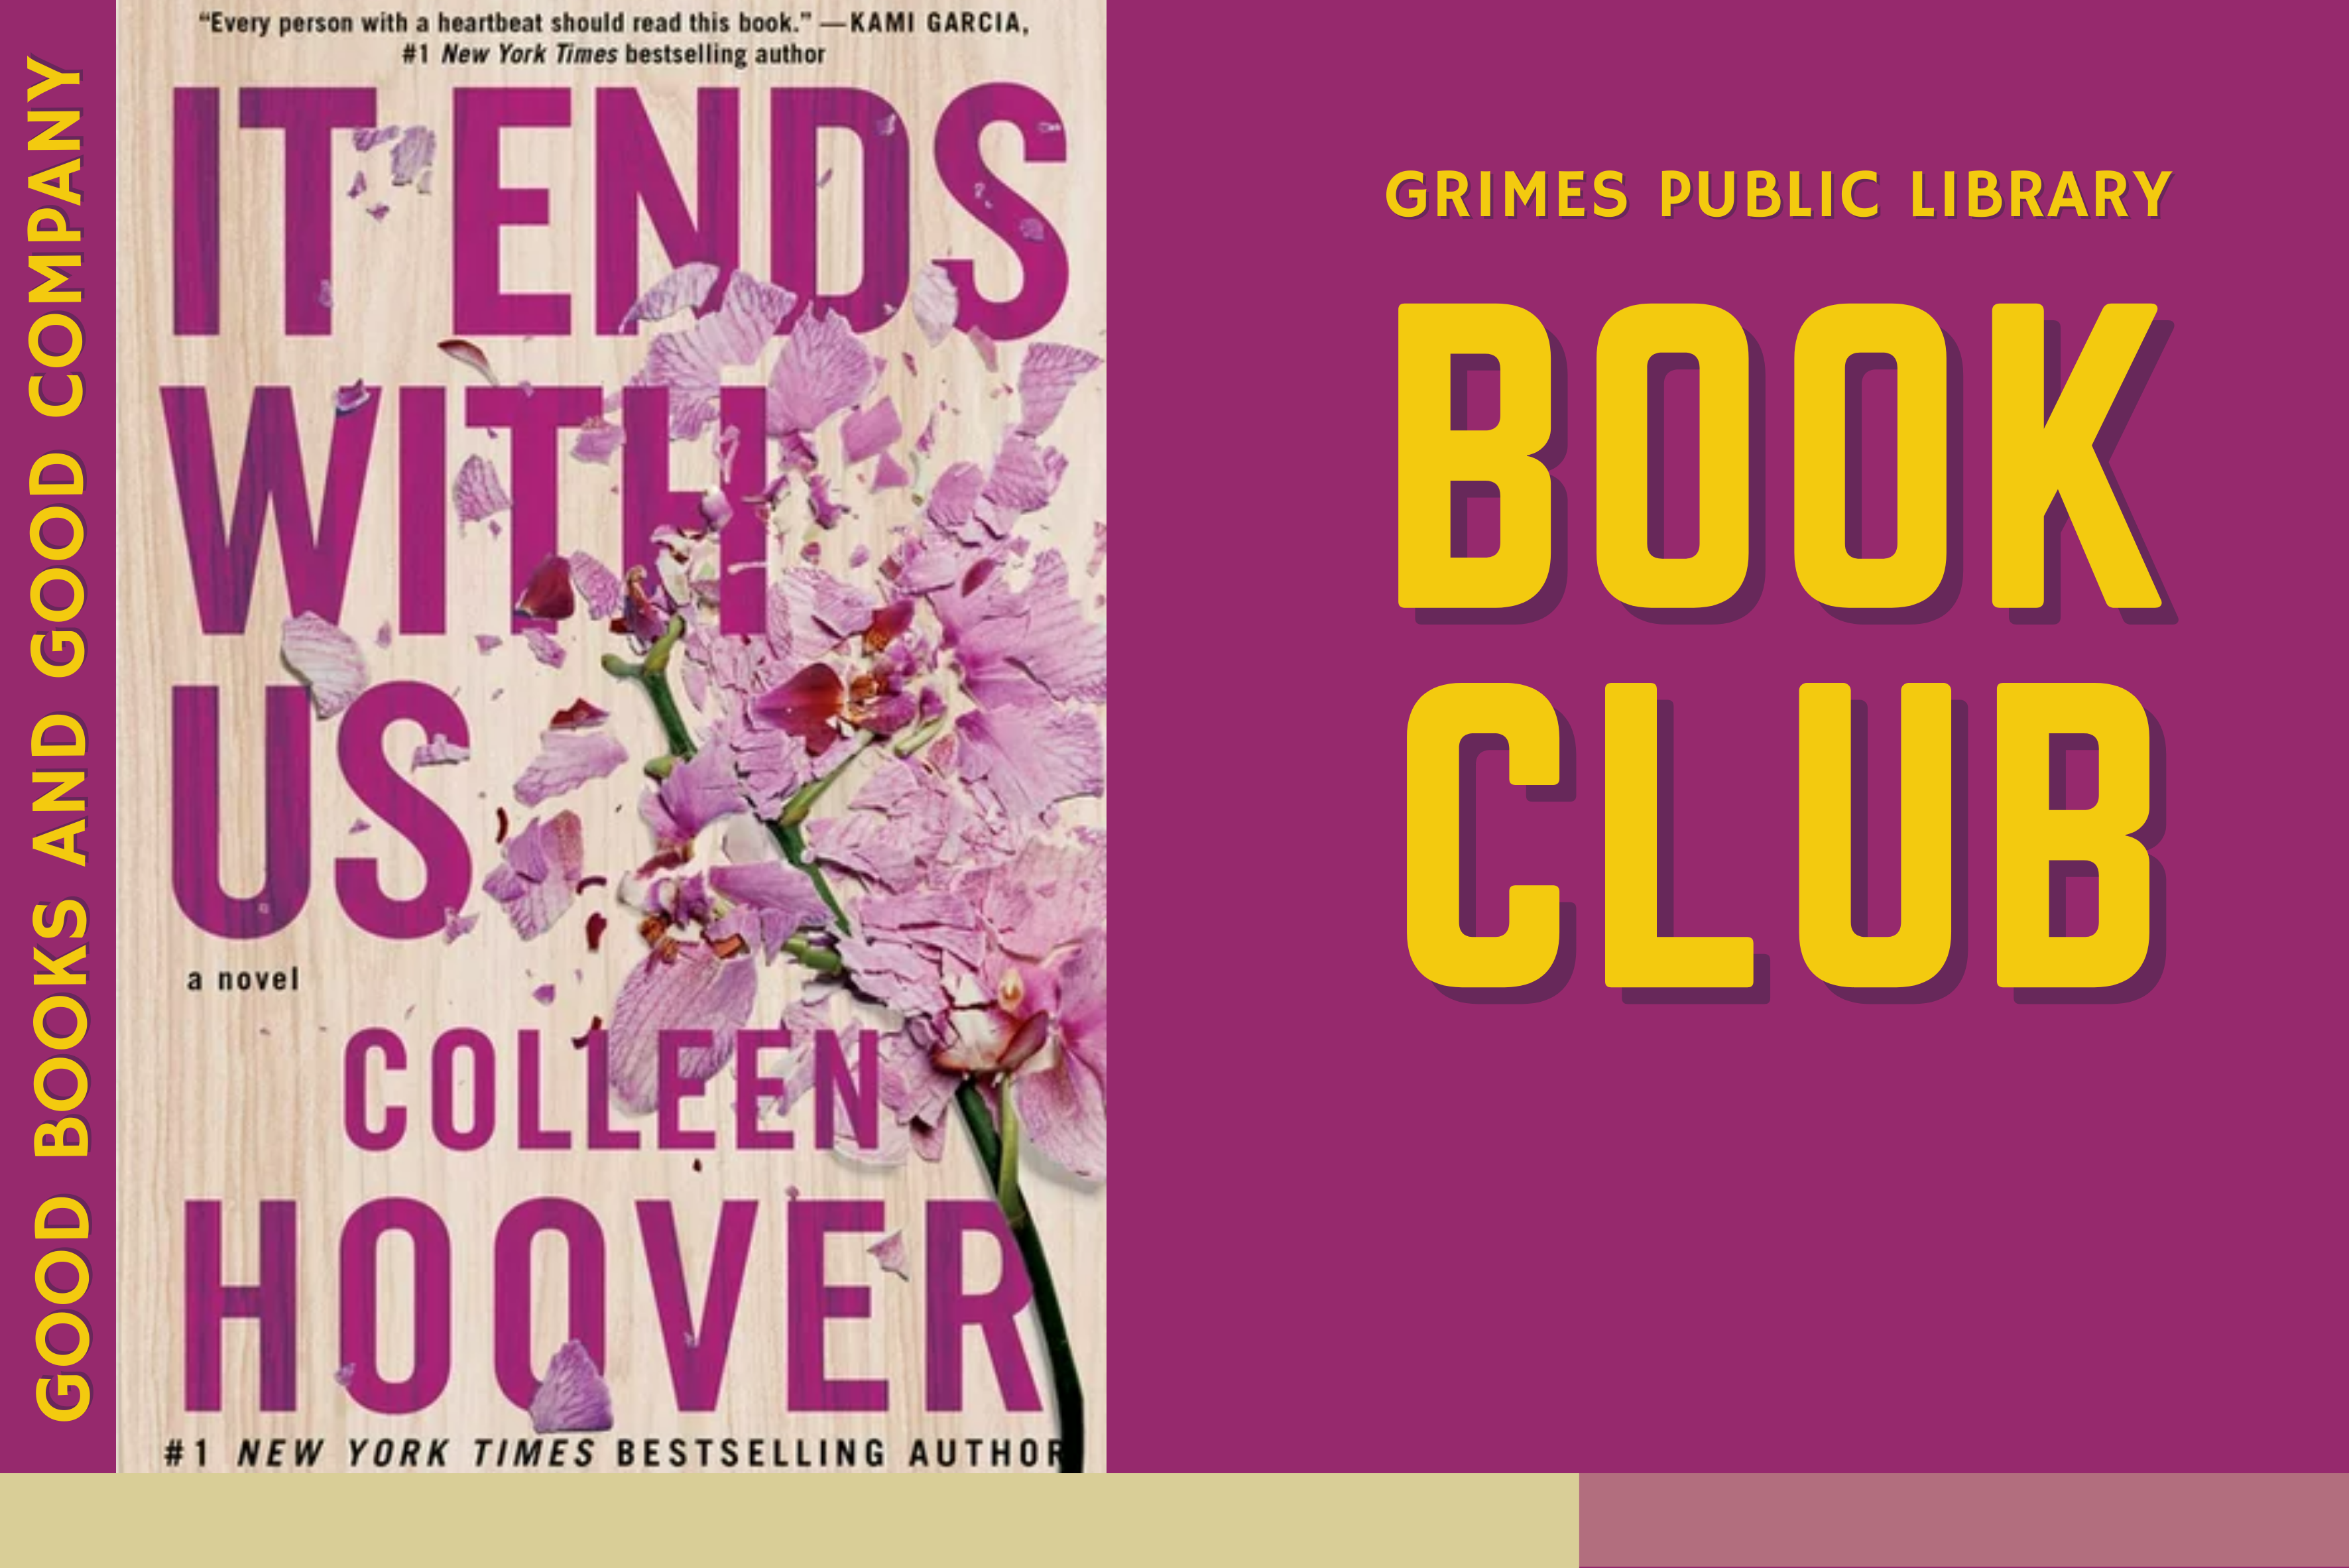 A picture of the cover of It Ends With Us by Colleen Hoover